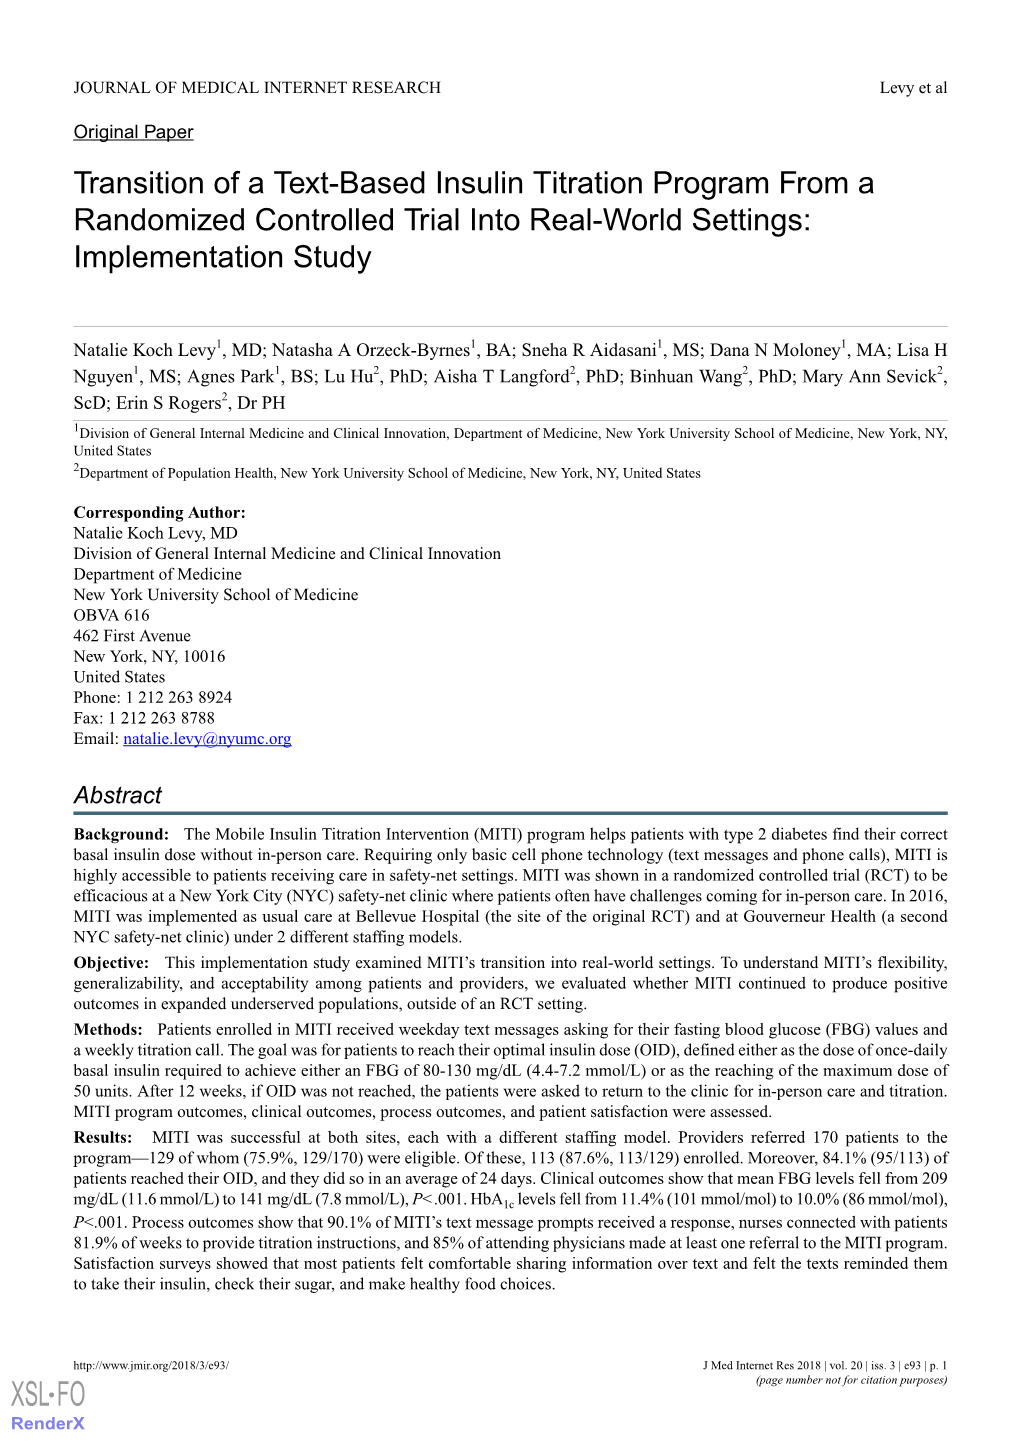 Transition of a Text-Based Insulin Titration Program from a Randomized Controlled Trial Into Real-World Settings: Implementation Study